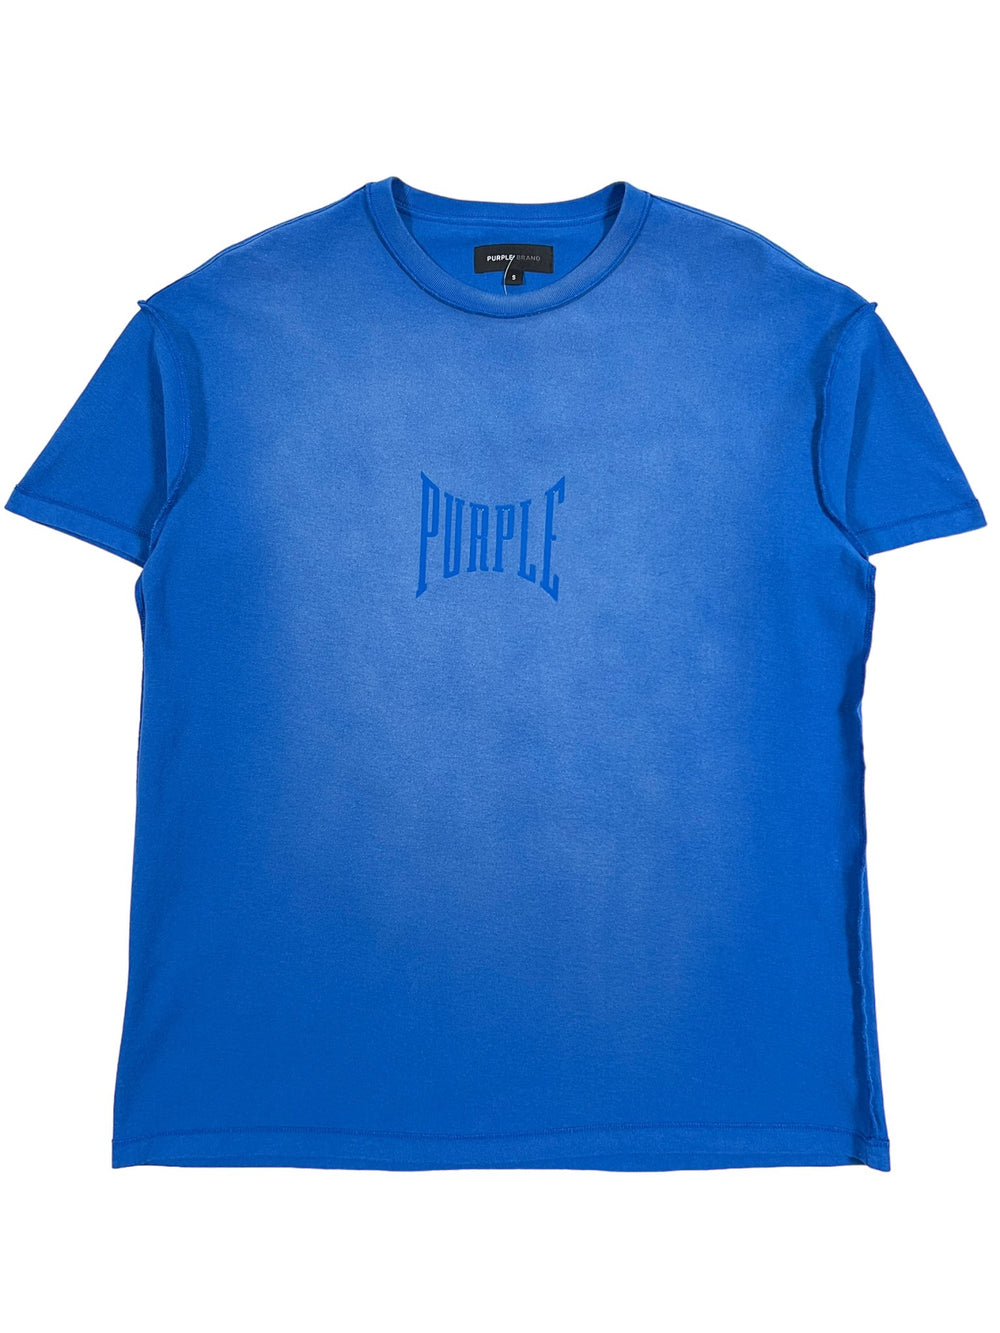 A PURPLE BRAND P101-JUCB TEXTURED INSIDE OUT TEE BLUE with the word purple on it.